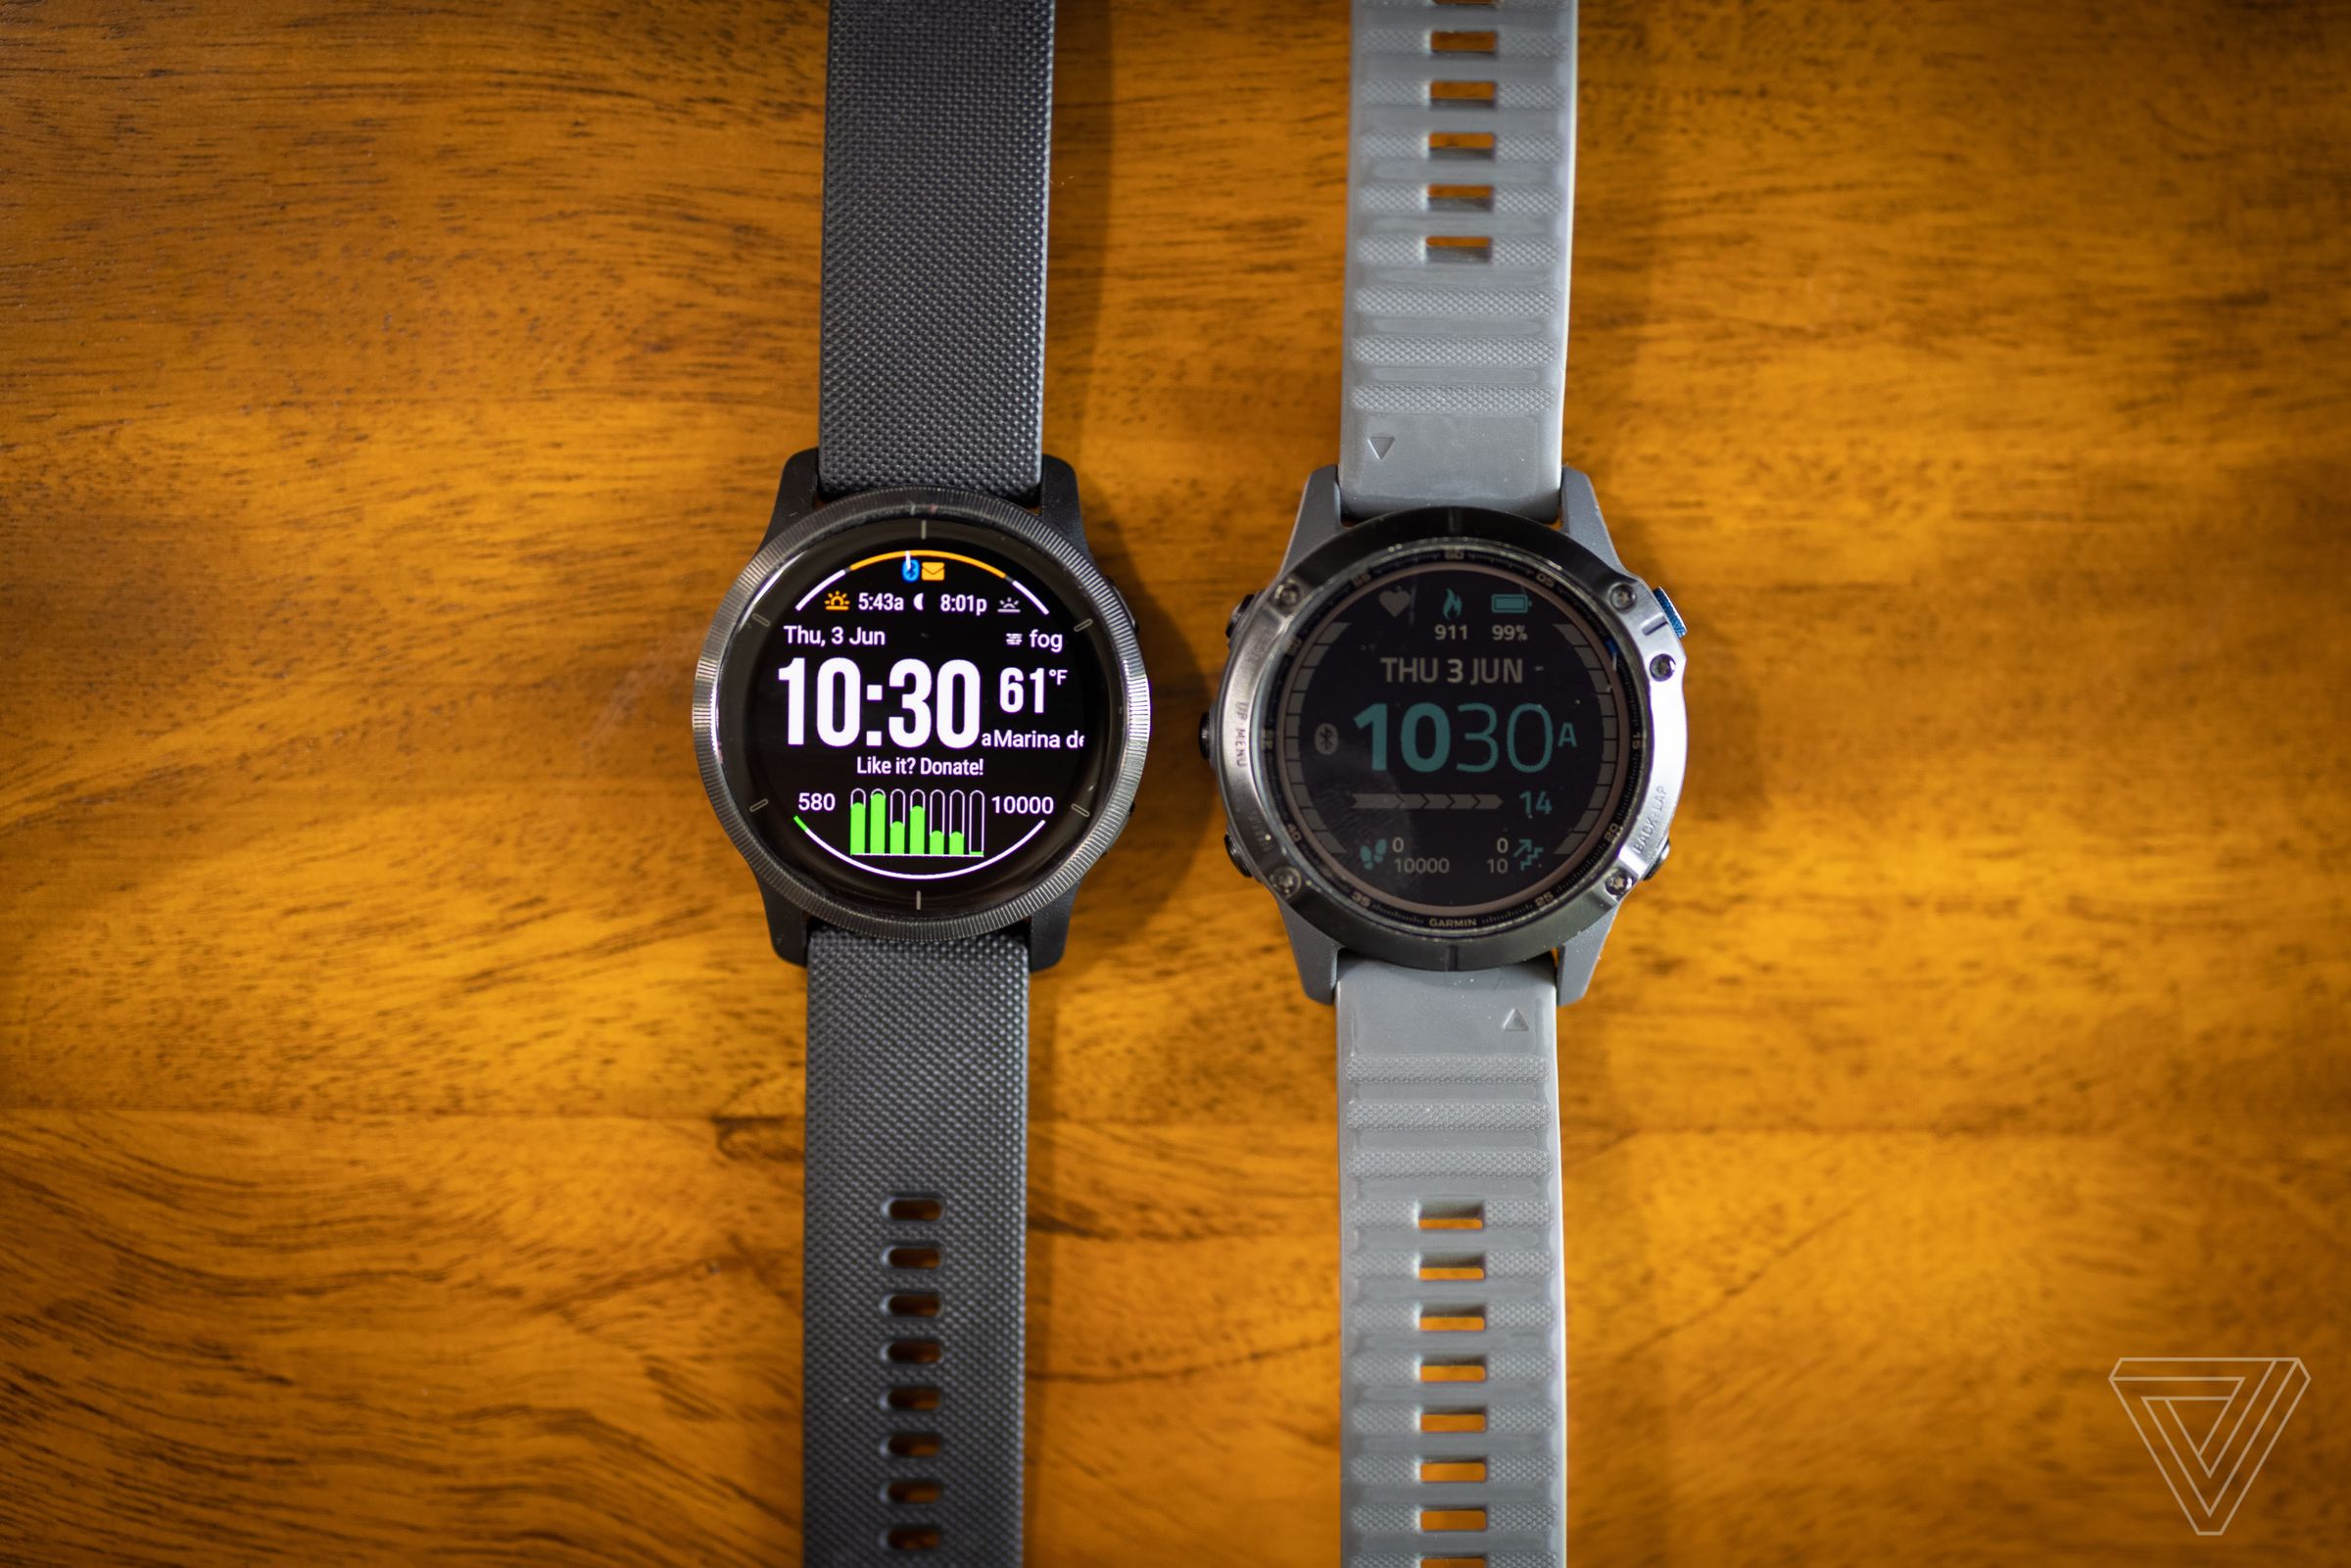 The Venu 2 is sleeker and more understated than Garmin’s other watches, such as the Fenix 6 seen here on the right.